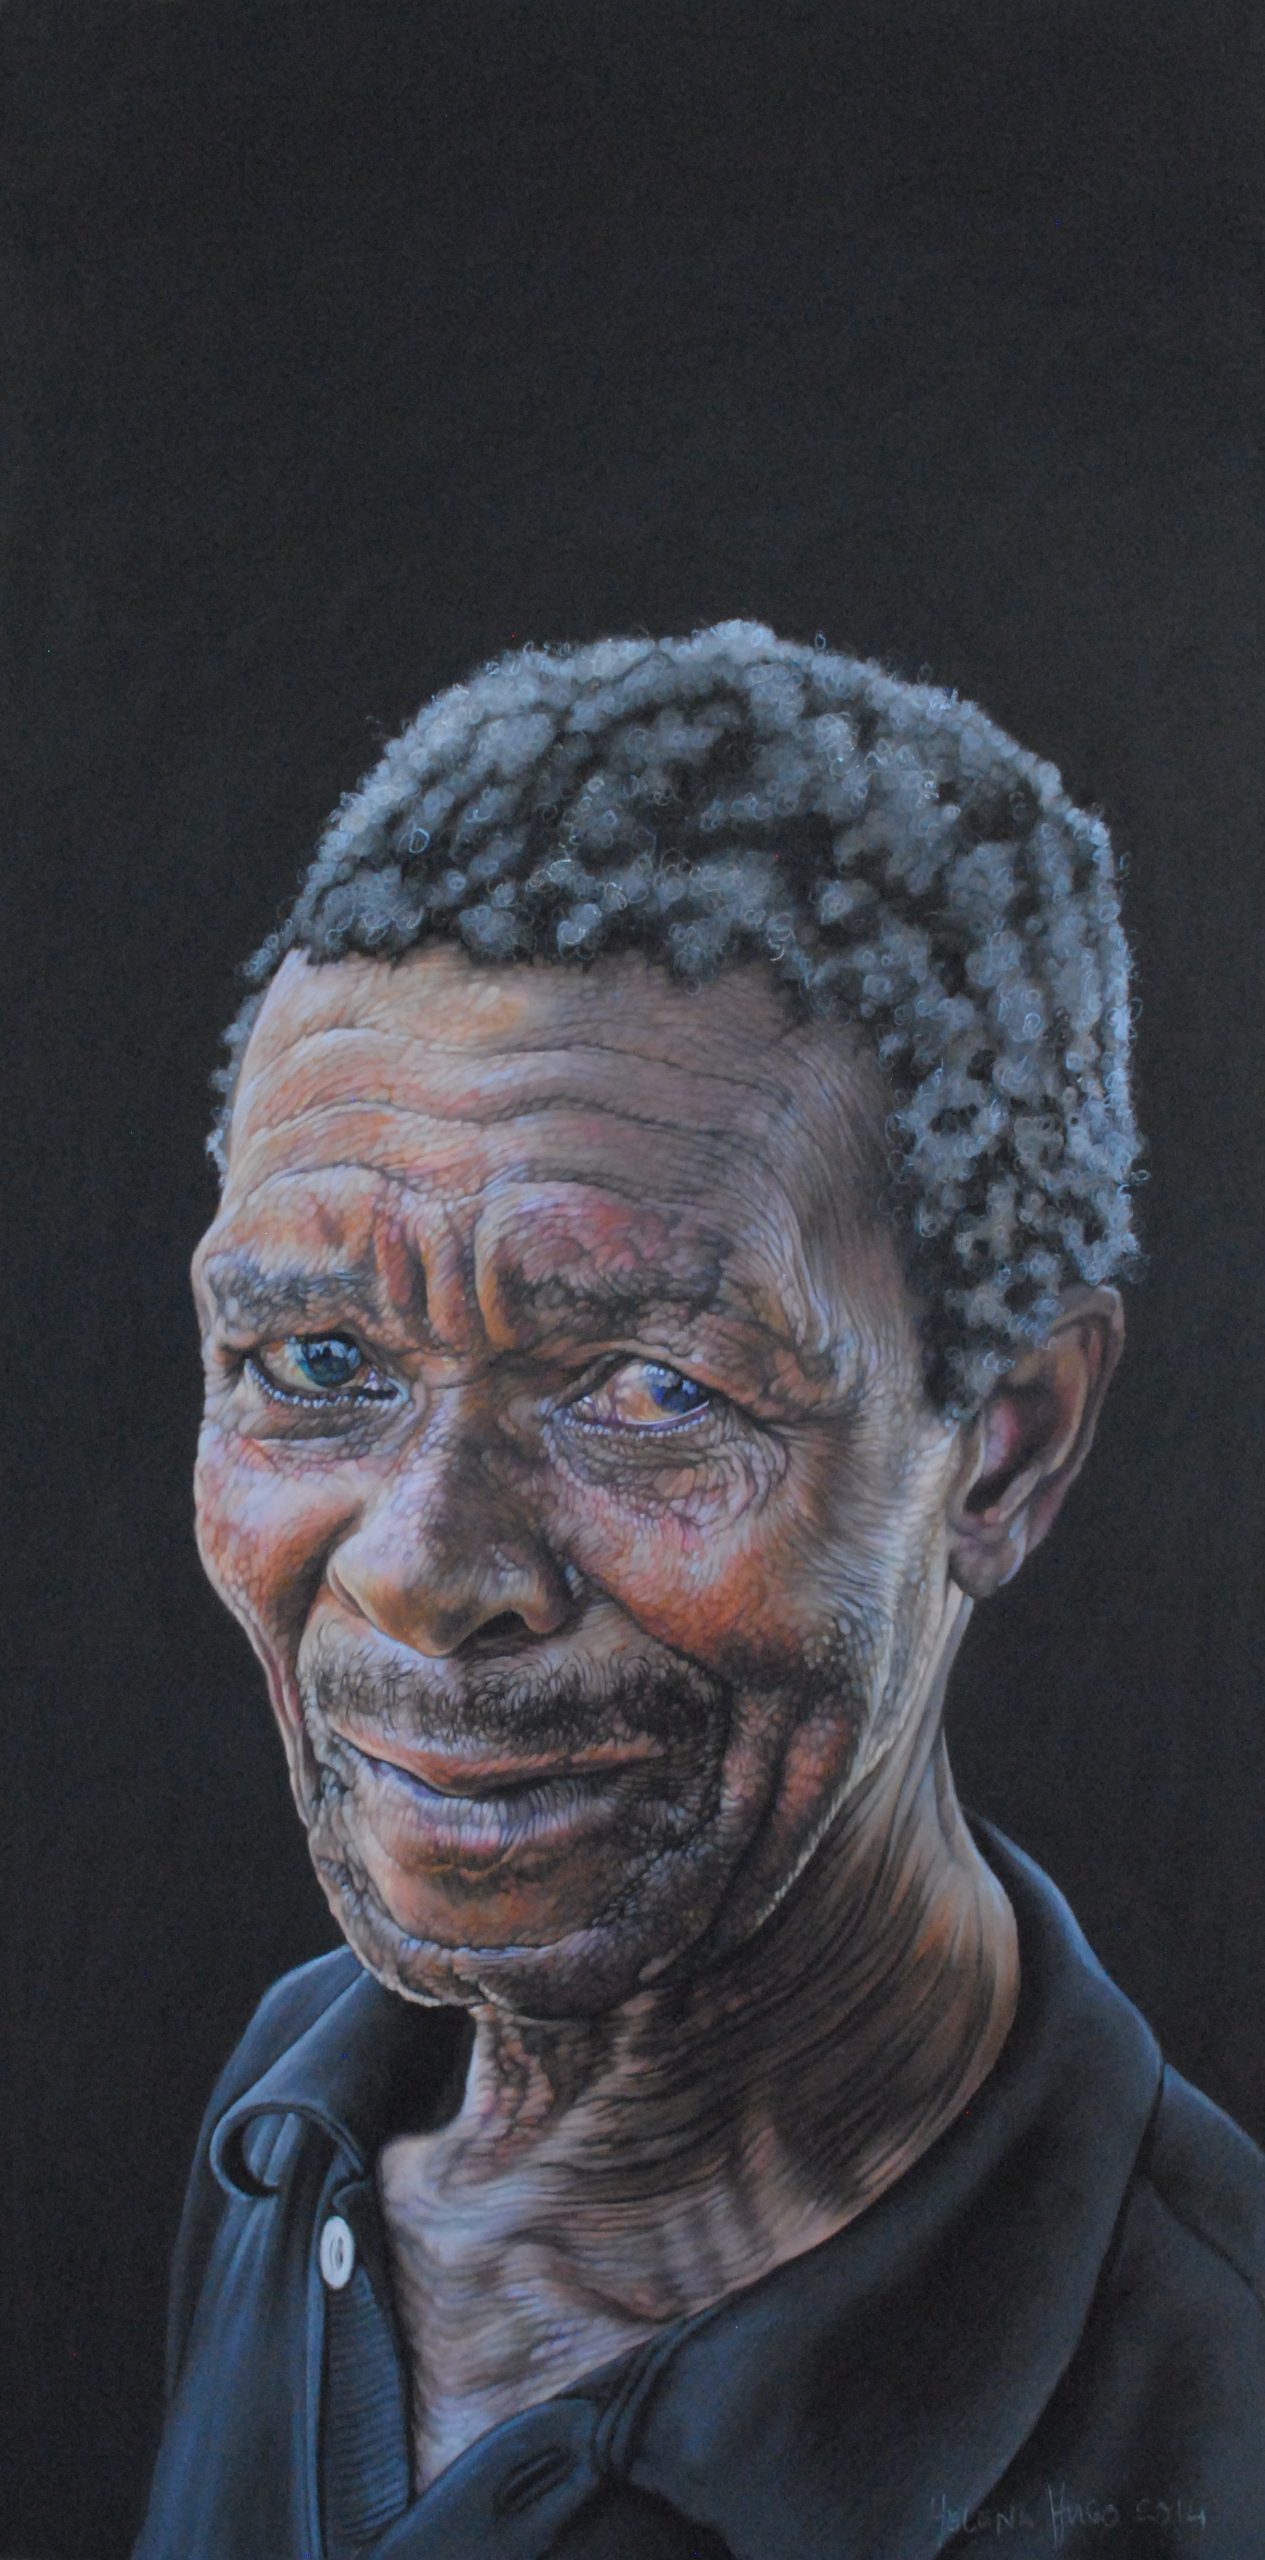 They Wither Thereof II

50cm x 25cm

Pastel on board